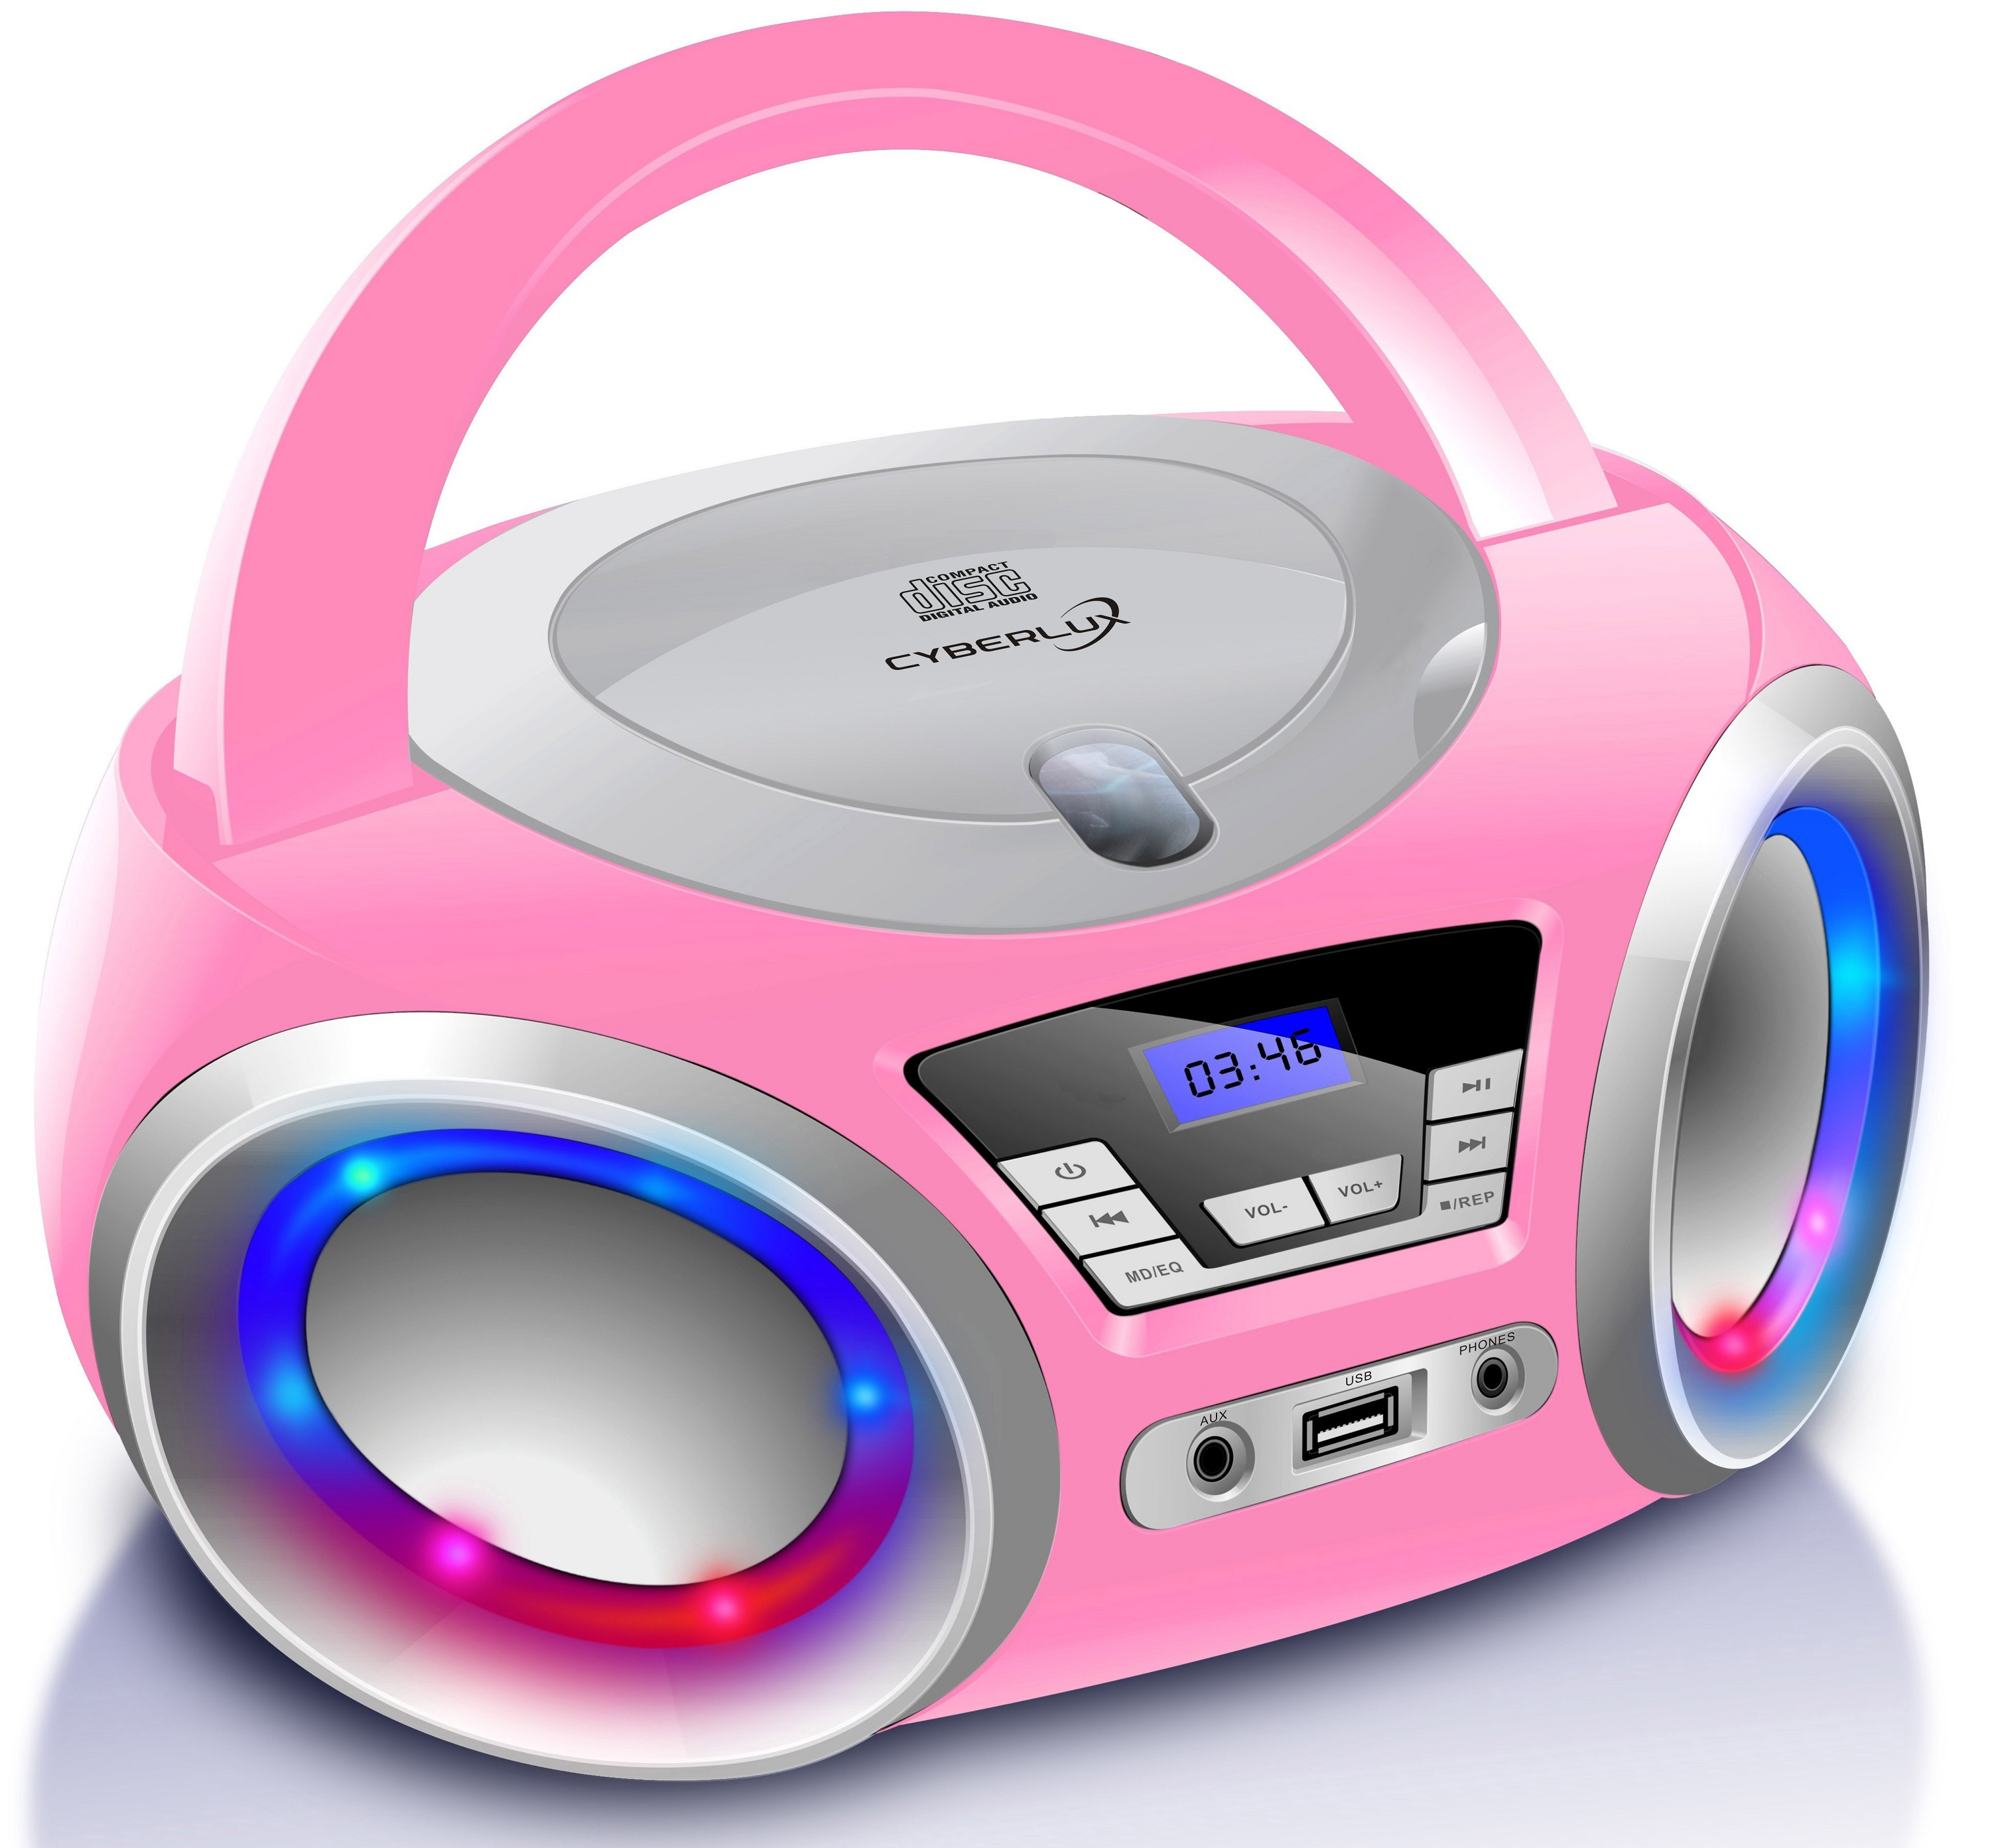 CYBERLUX CL-910 CD-Player mit Kopfhöreranschluss Tragbares | Pink Loopy LED-Beleuchtung Radio | Stereo